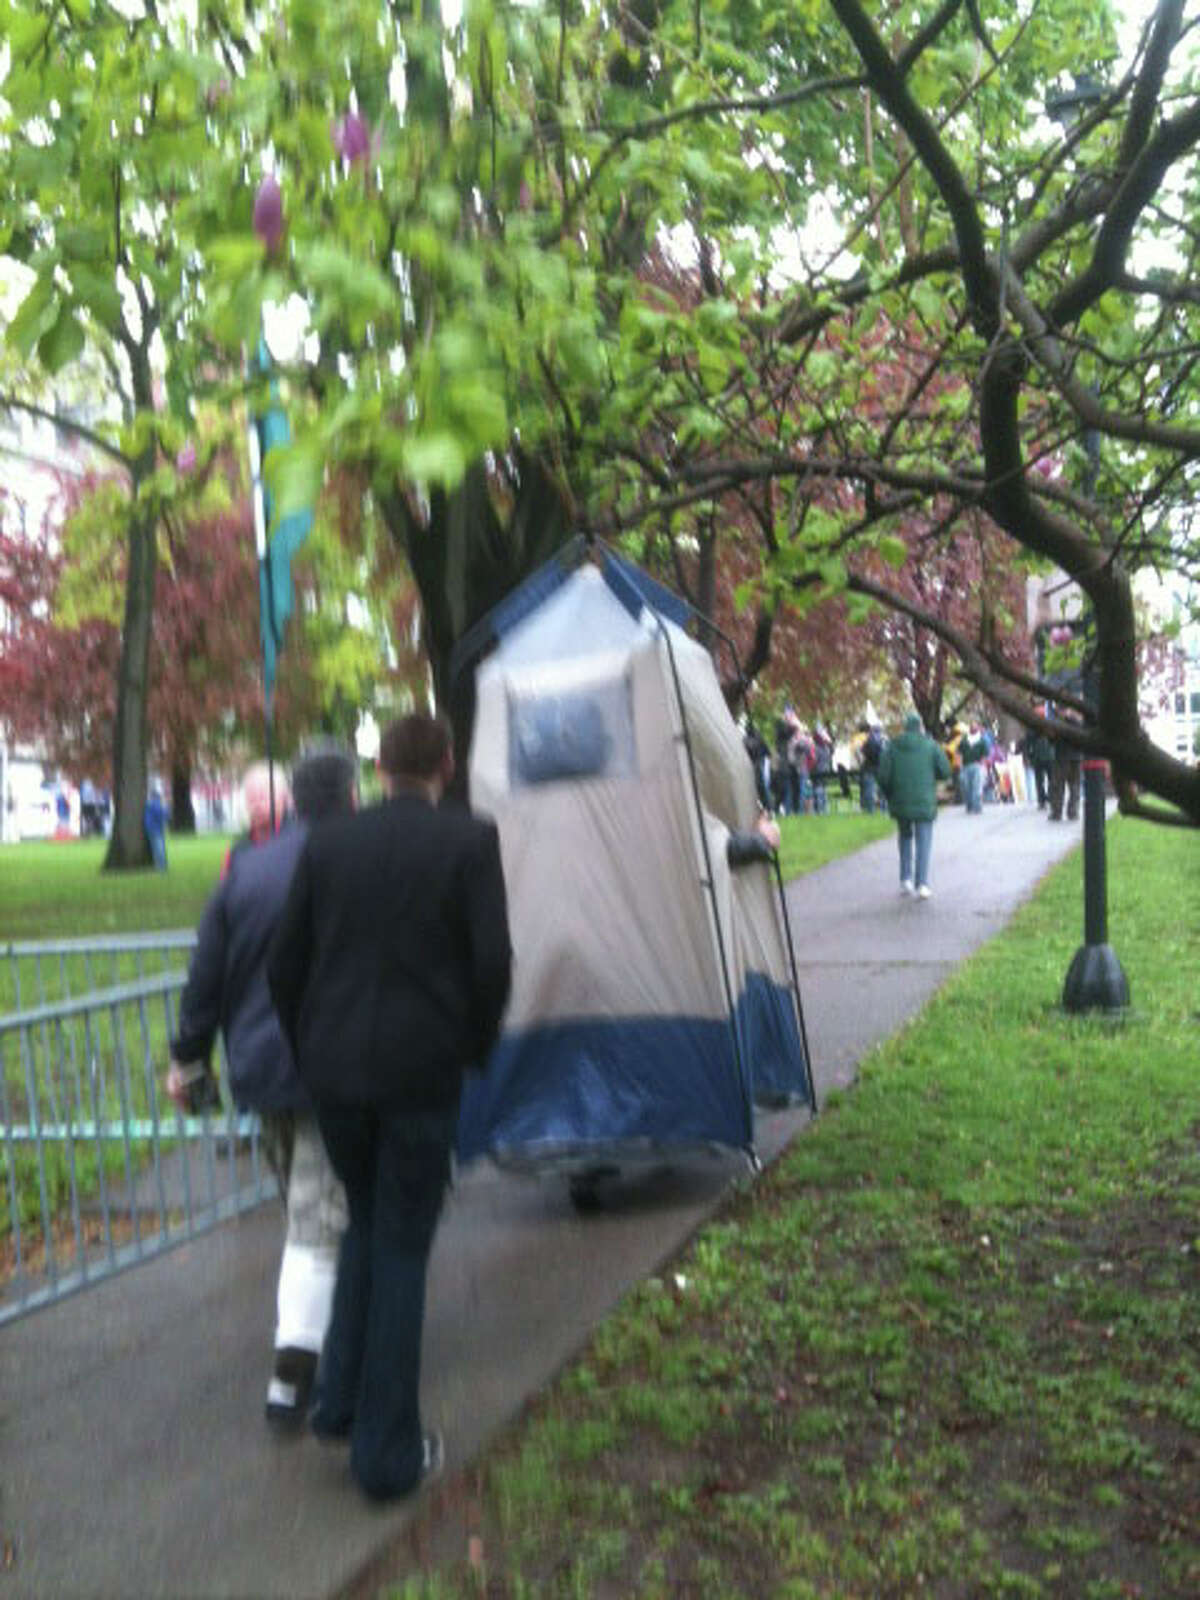 Tom Rostocki, 50, of Colonie carries his tent into Lafayette Park in Albany on Tuesday, May 1, 2012. (Bryan Fitzgerald / Times Union)